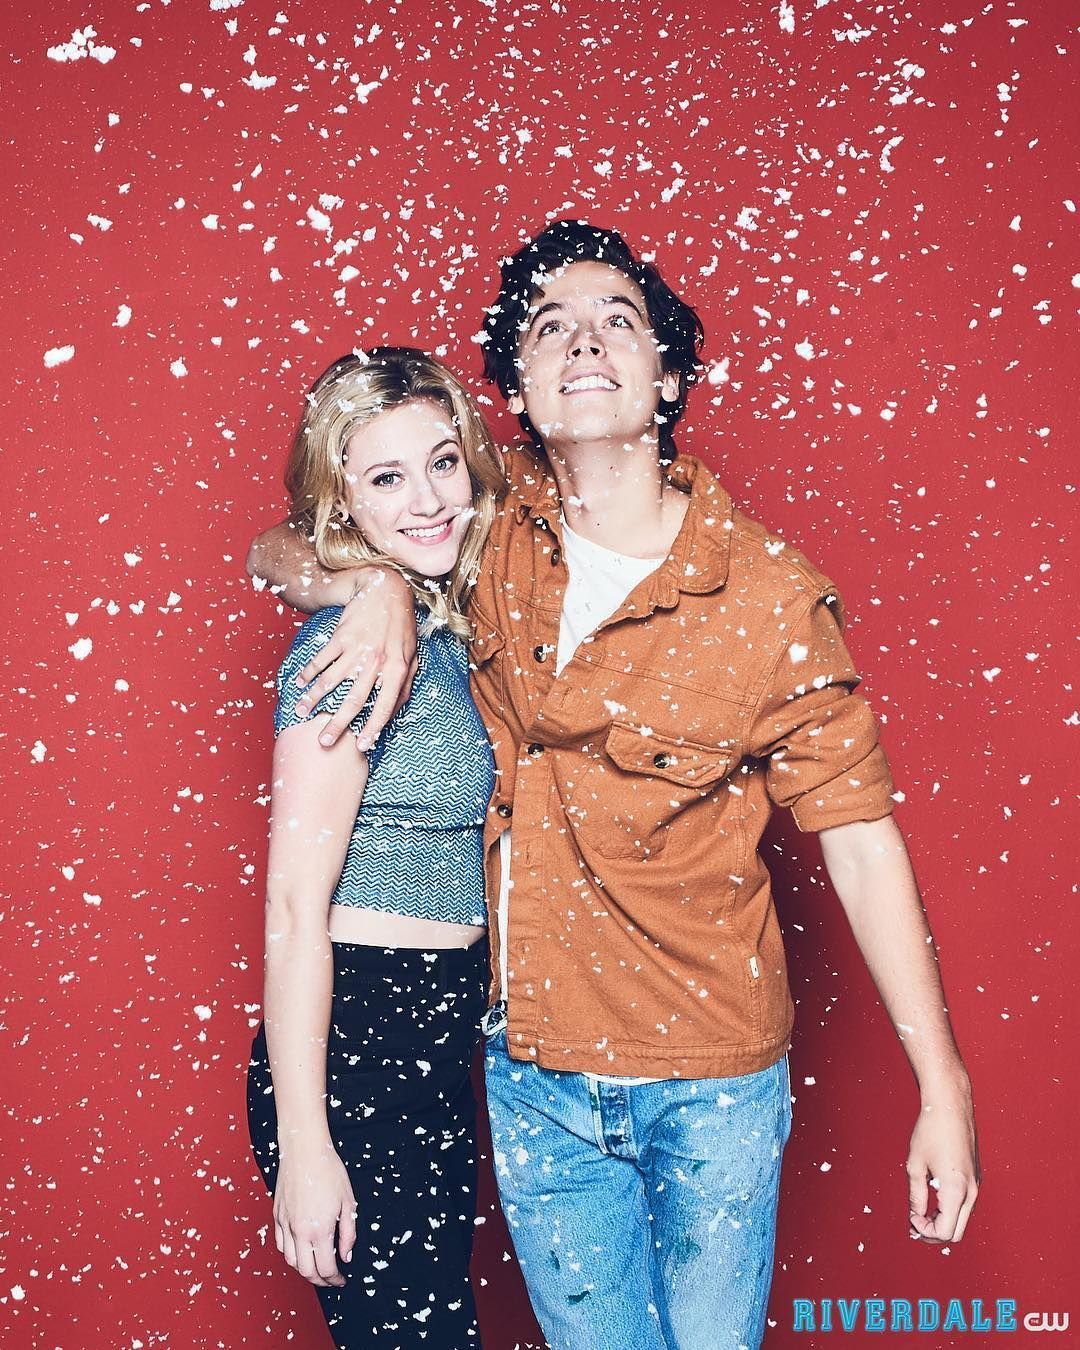 Riverdale в Instagram: «In case all you want for Christmas is Bughead. Stream the latest e. Riverdale cole sprouse, Bughead riverdale, Riverdale